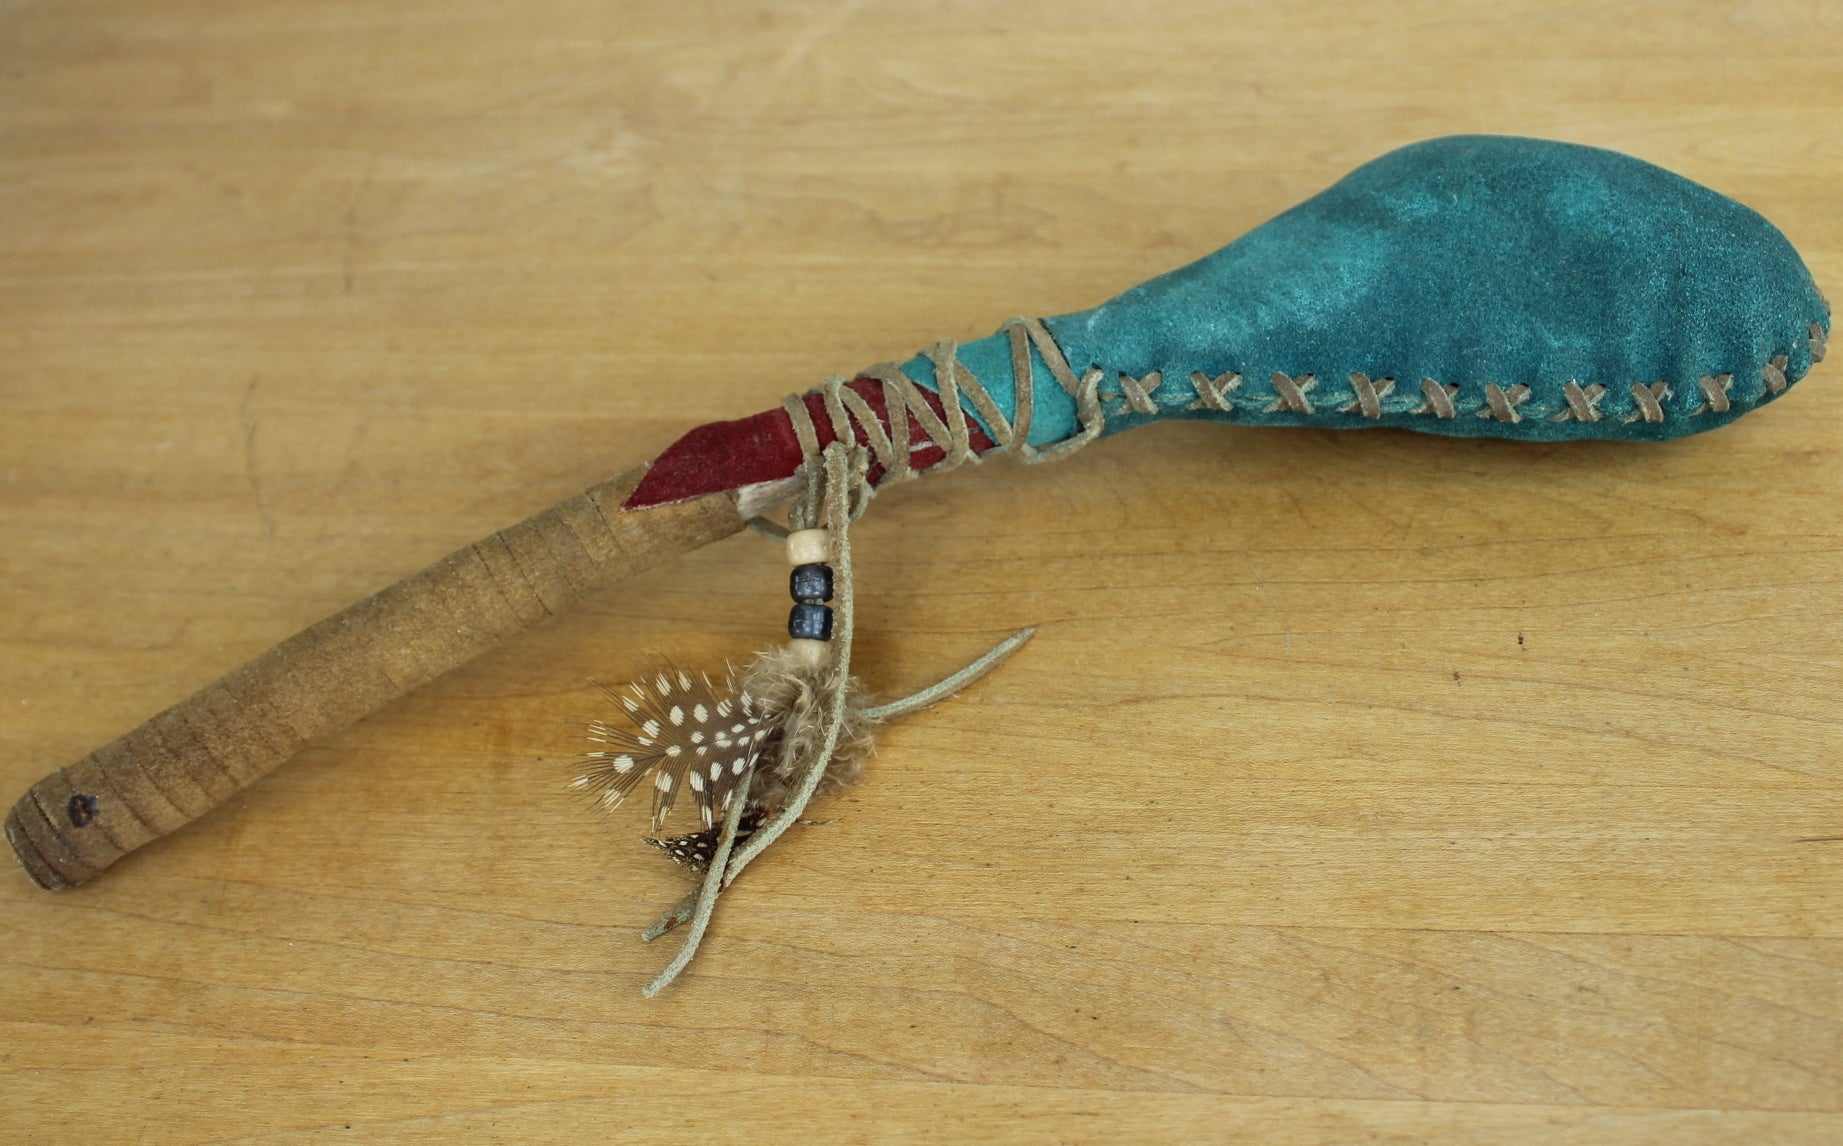 Native American Style Dance Rattler Shaker Turquoise Suede Feather Beads well crafted